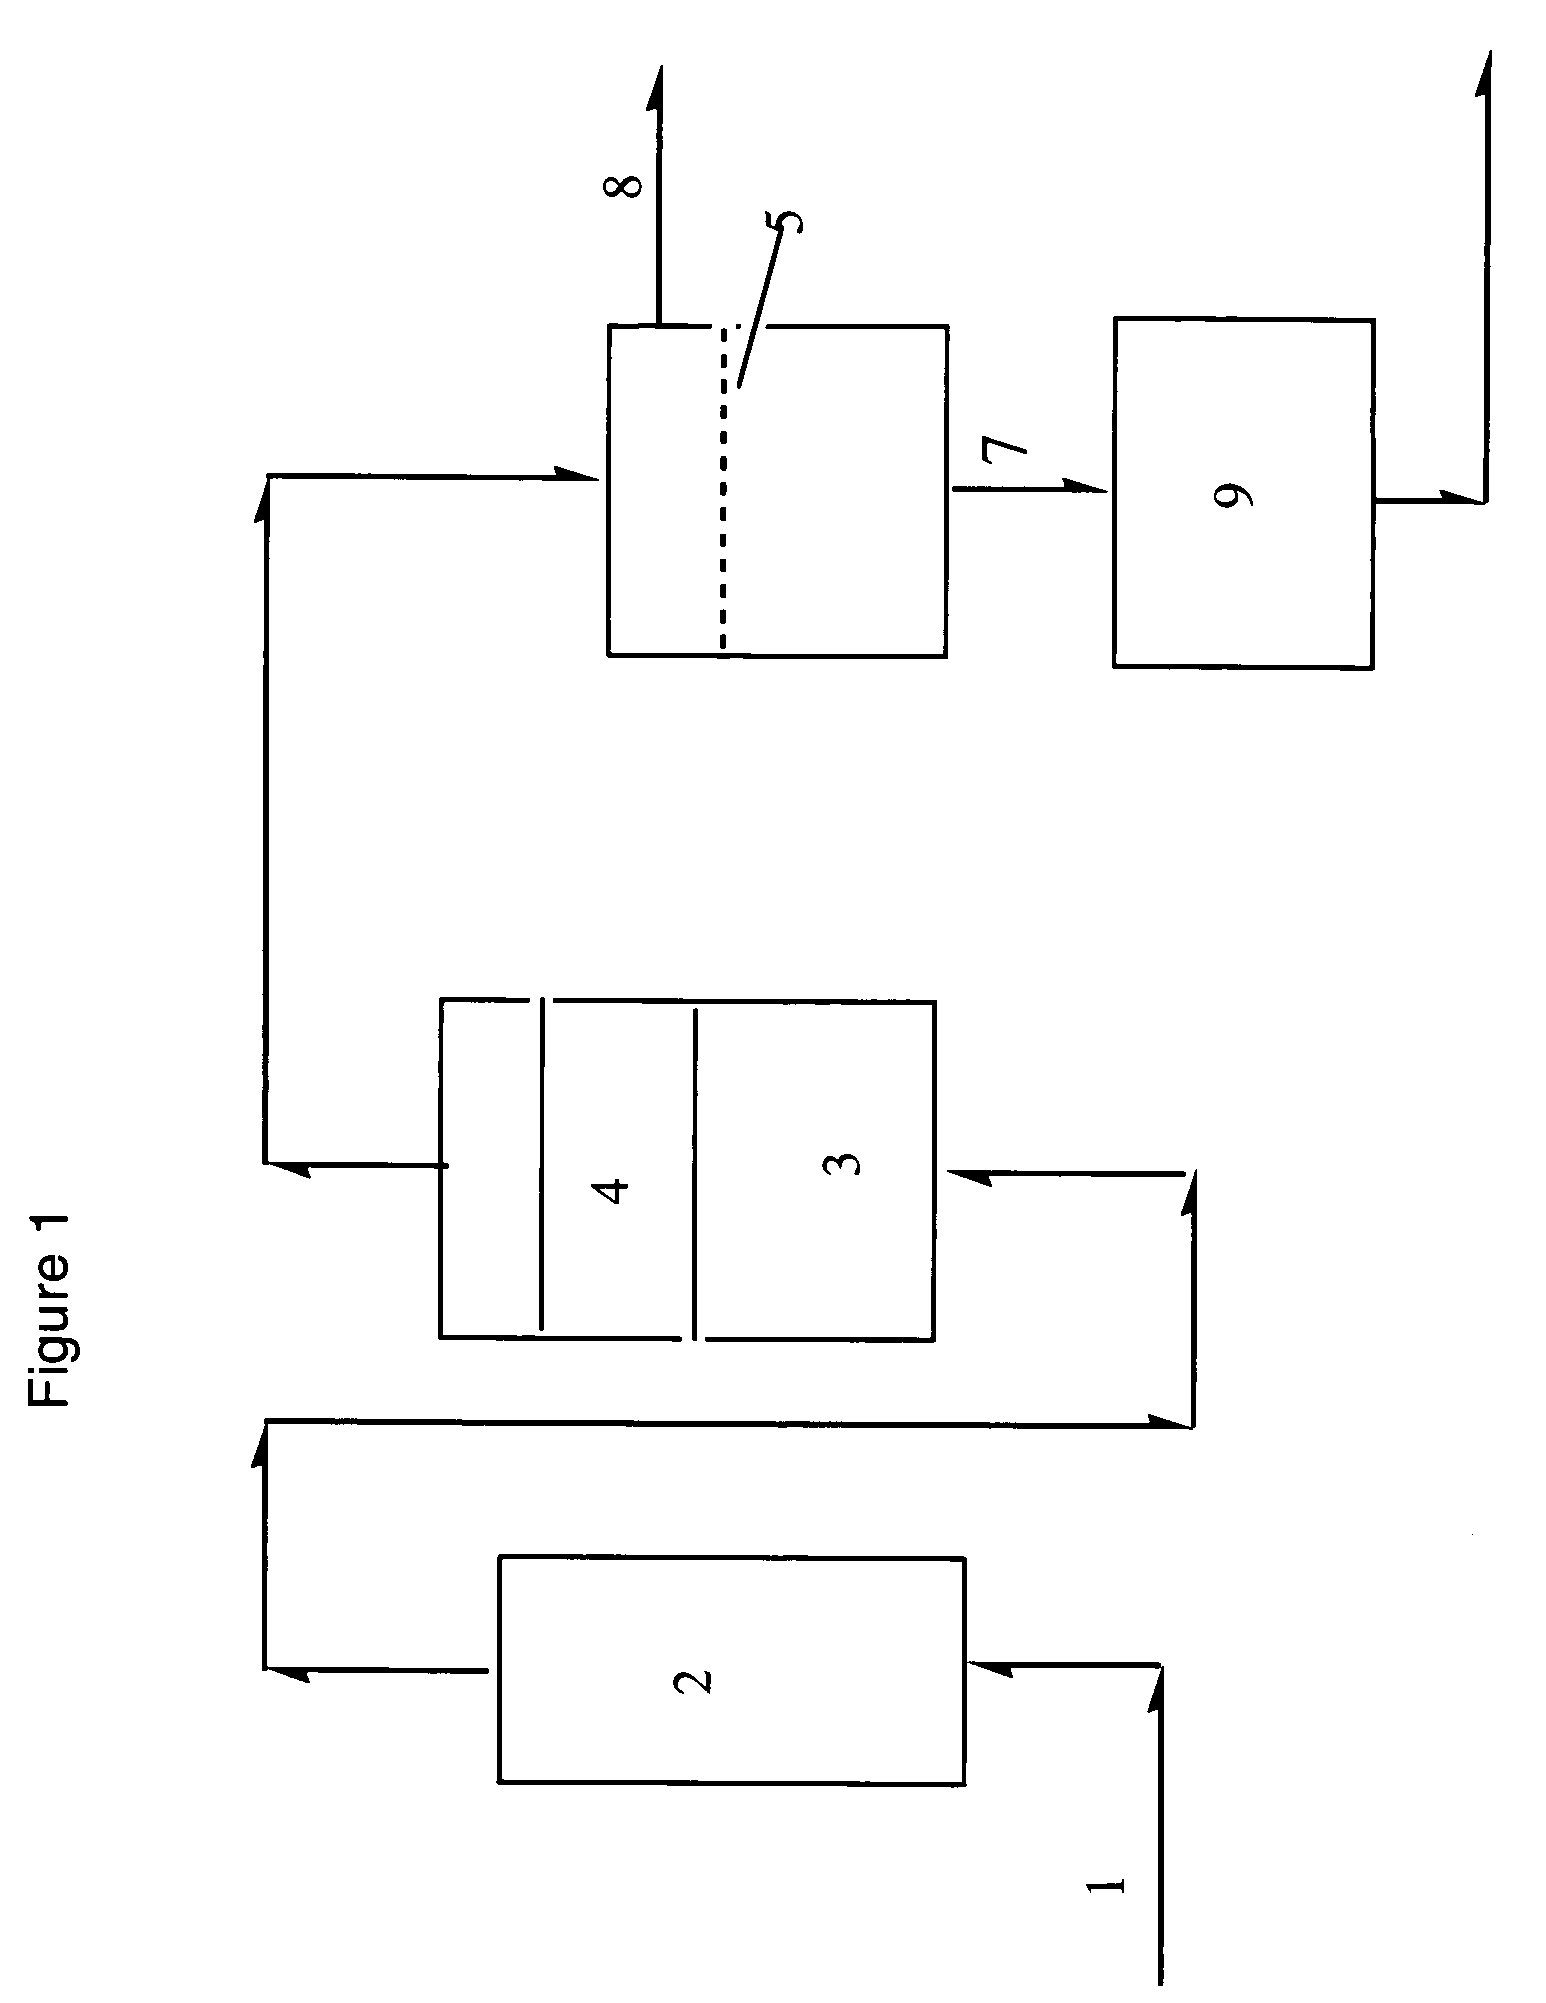 Process for the separation of olefins from paraffins using membranes